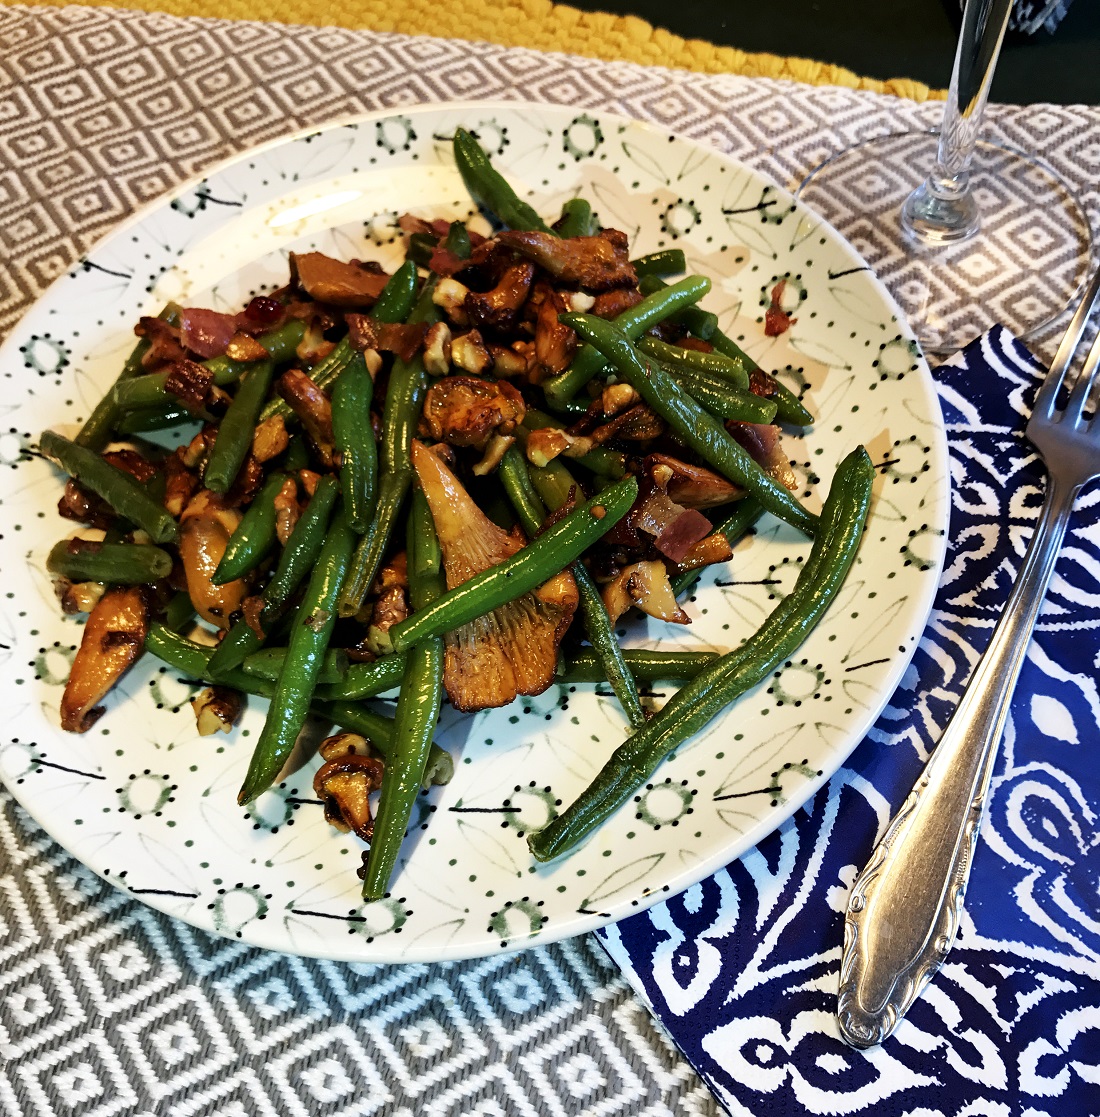 @projectfairytale: Chantrelle Mushrooms with Green beans, Bacon and Toasted Walnuts